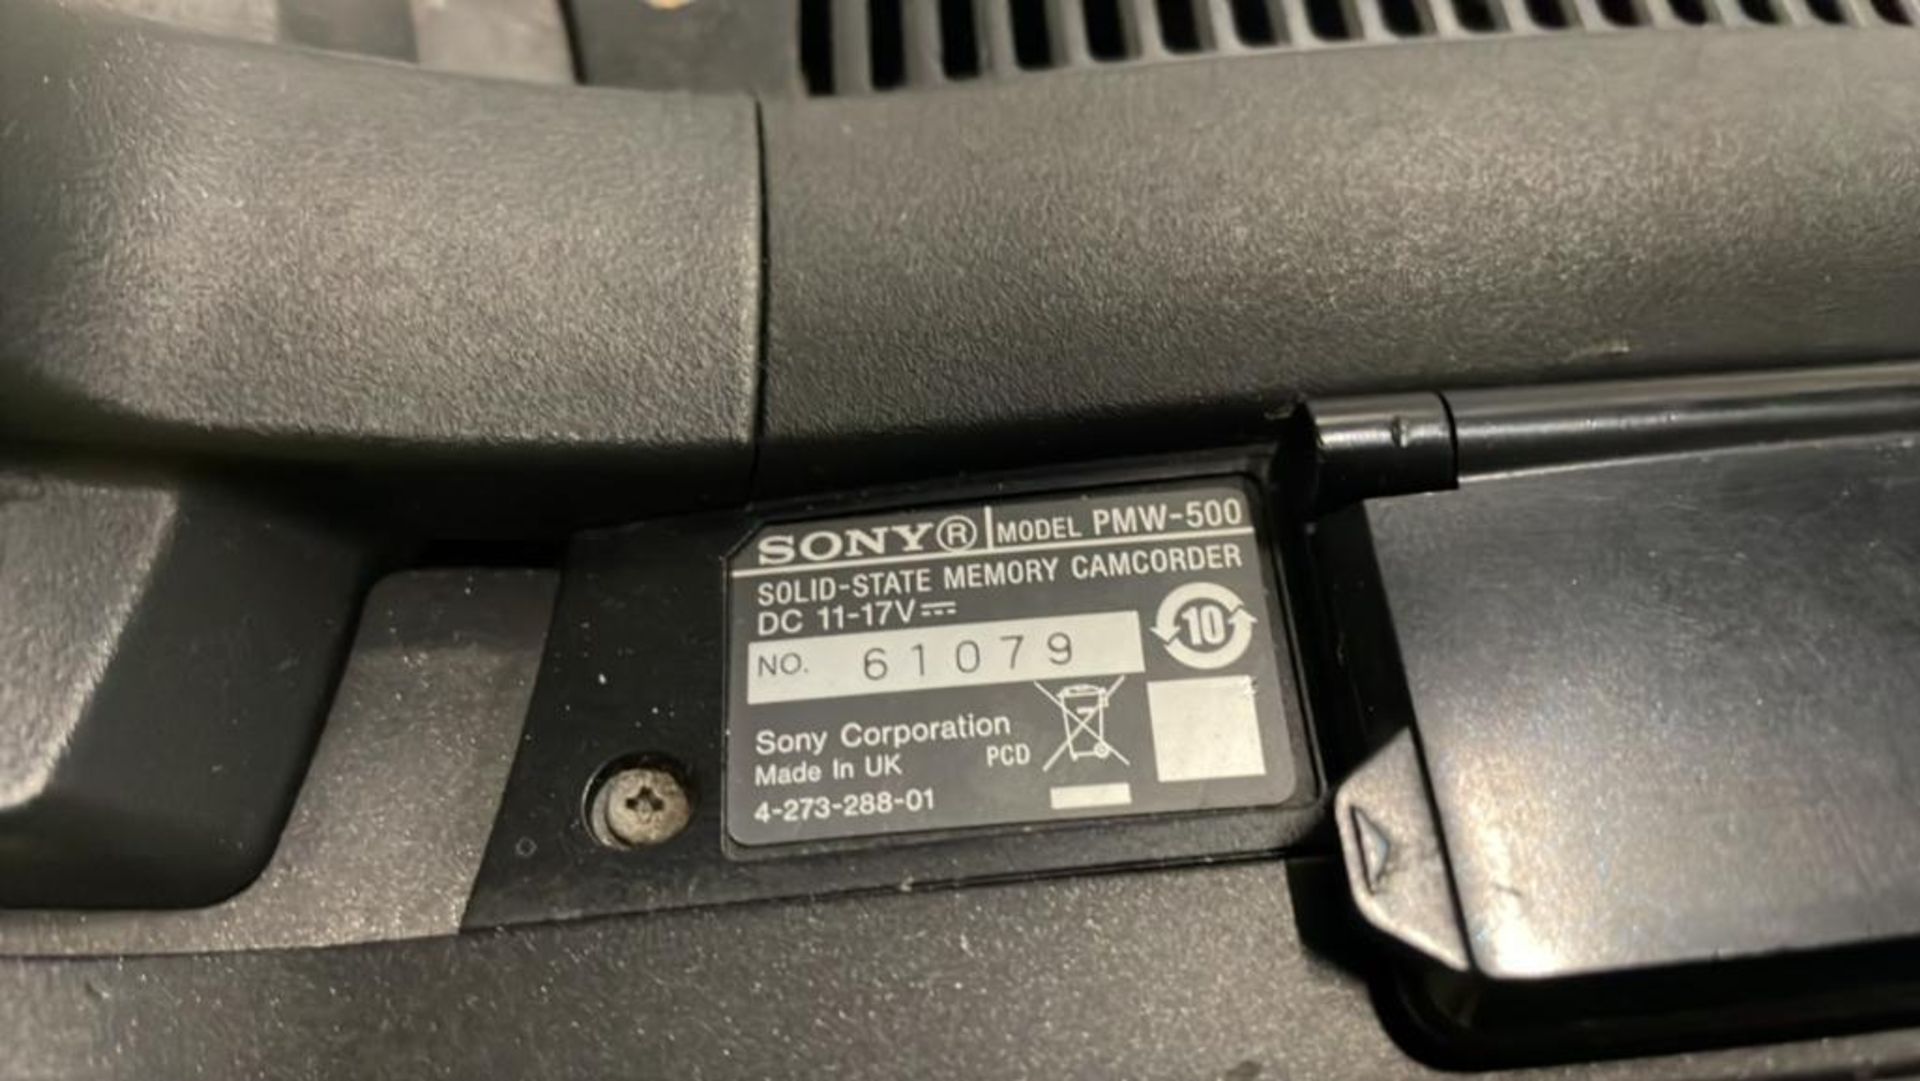 Sony PMW-500 SN: 61079 - Image 5 of 9